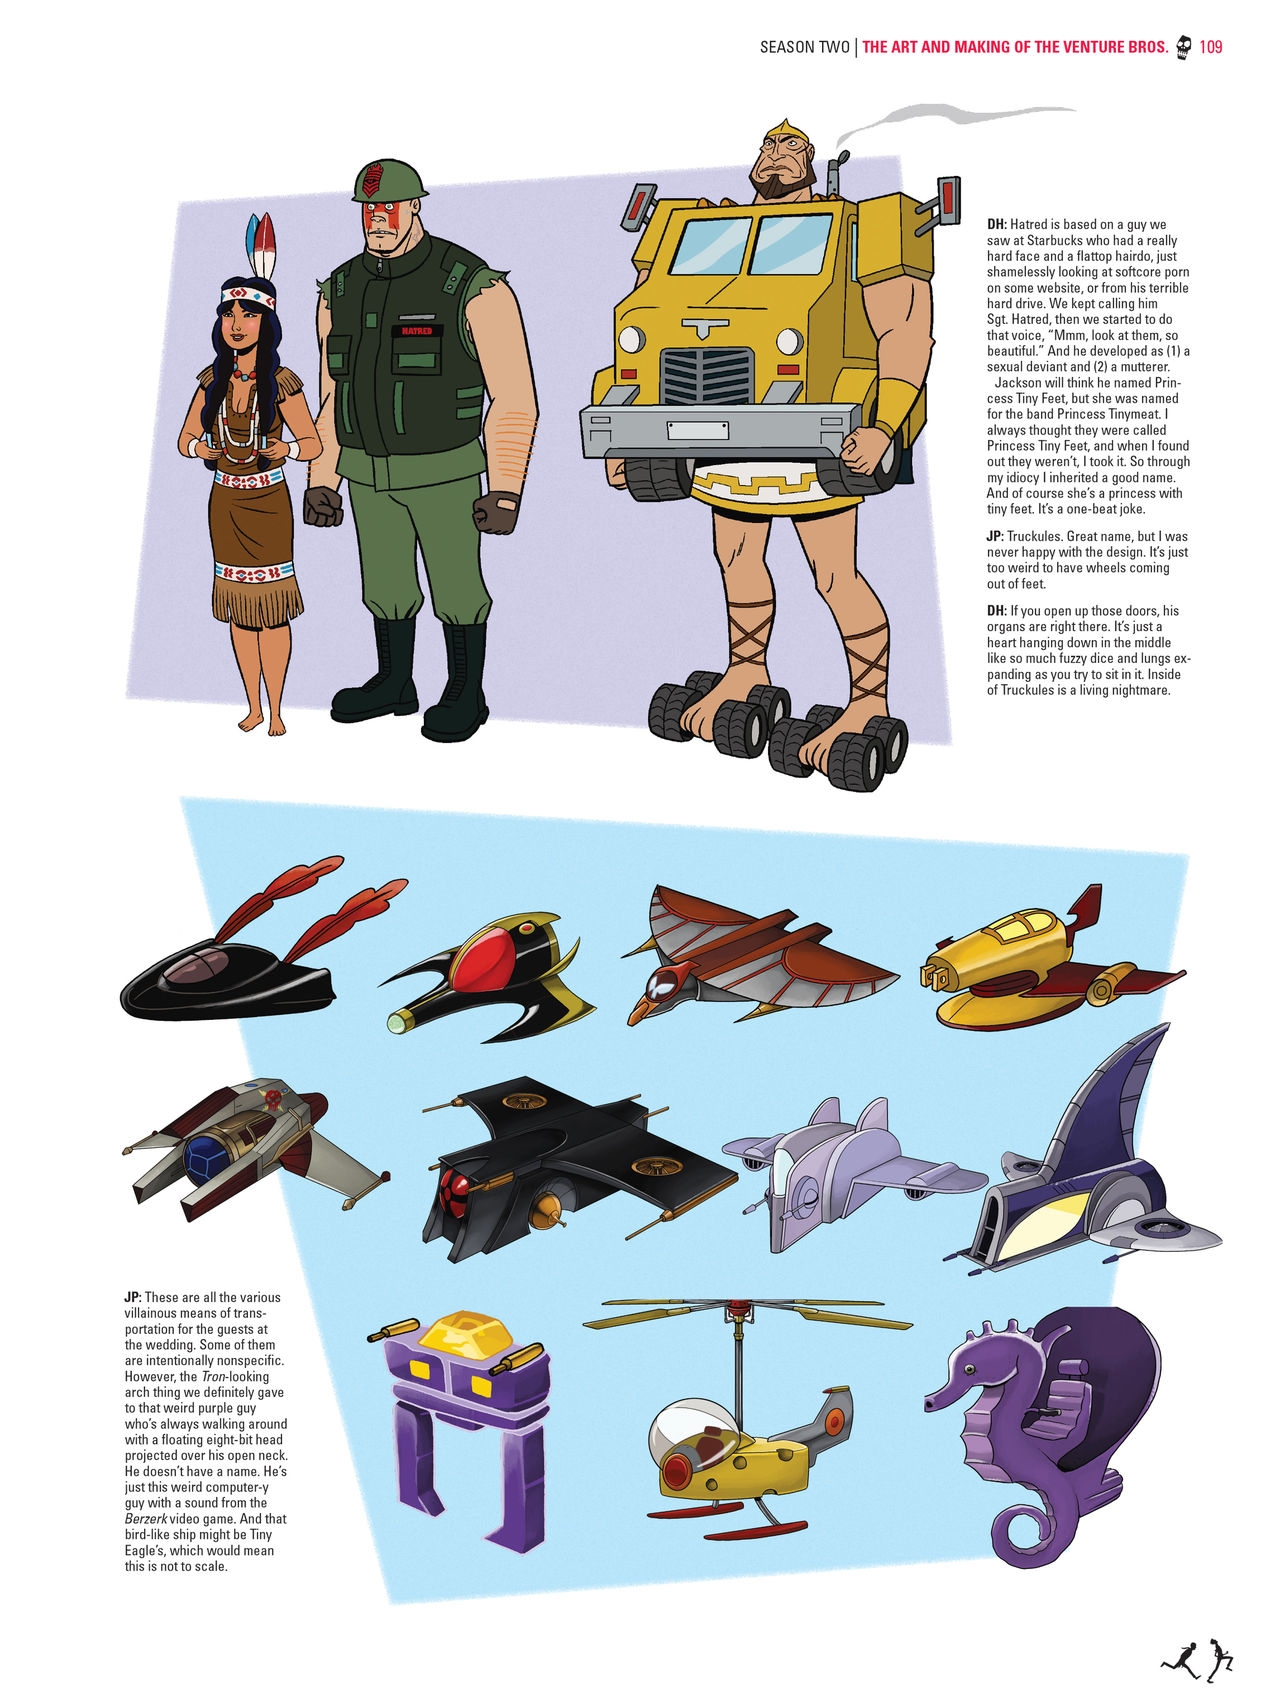 Go Team Venture! - The Art and Making of the Venture Bros 108